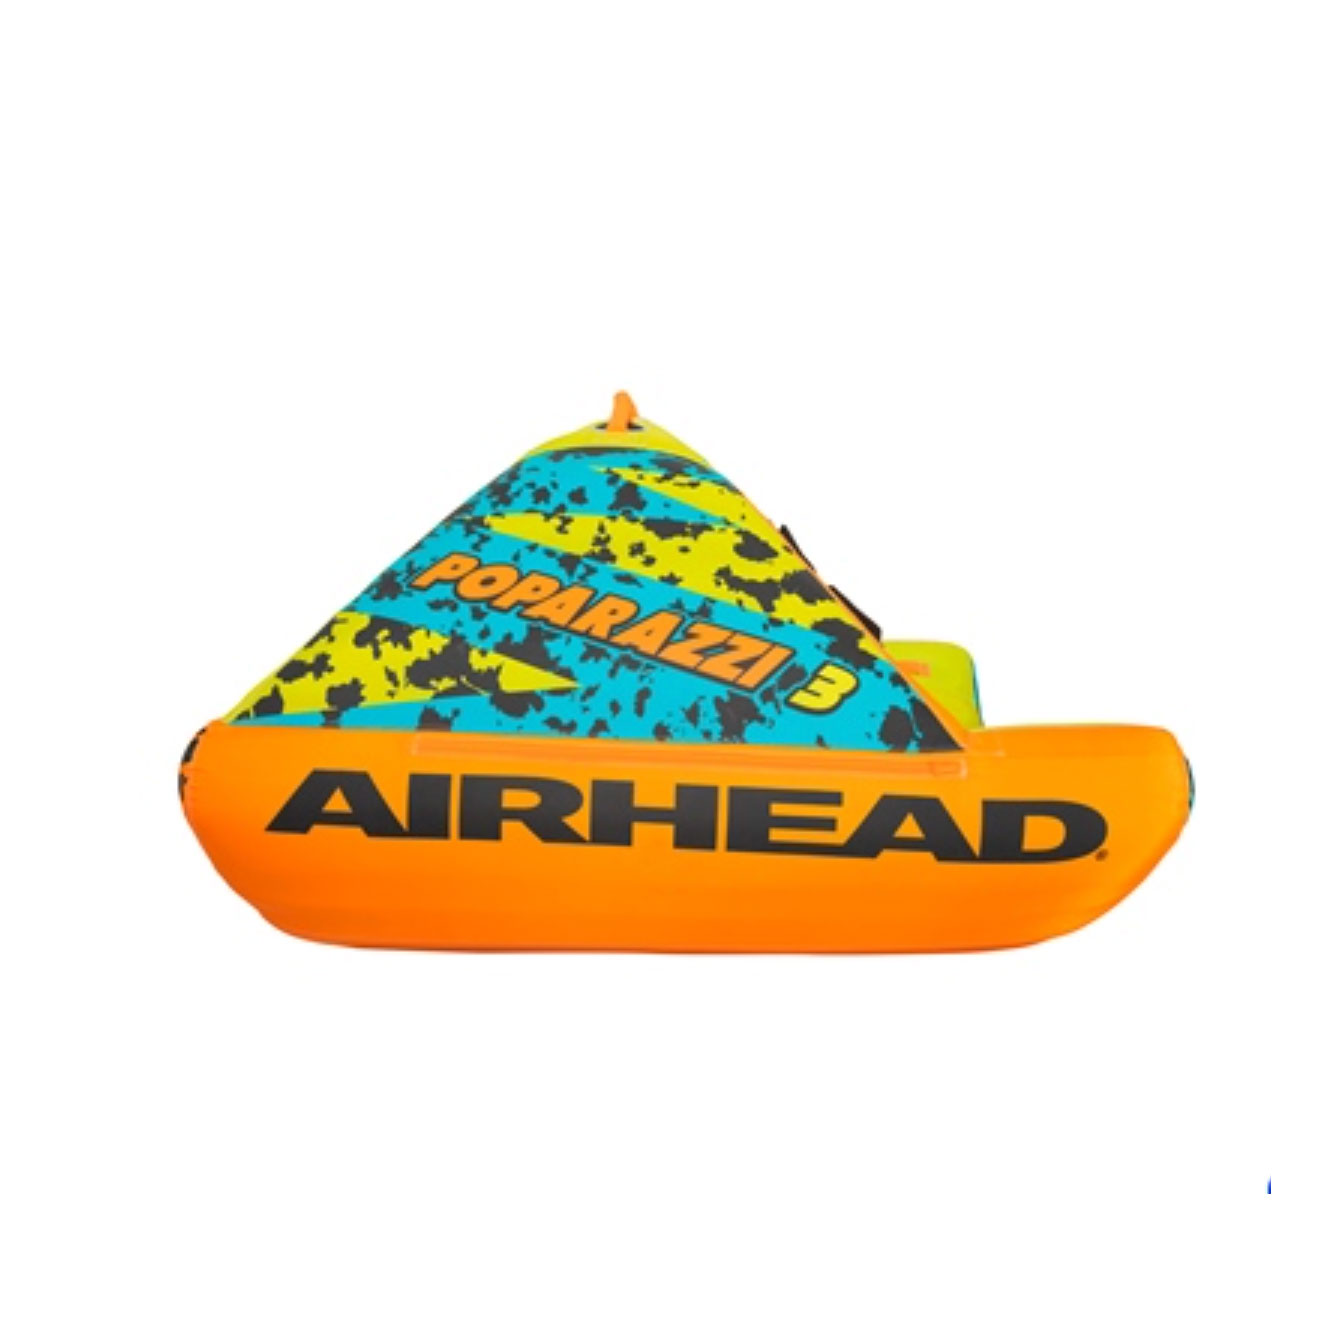 Airhead AHPZ-1750 Poparazzi 3 Person Inflatable Towable Water Lake Boating Tube - image 2 of 7